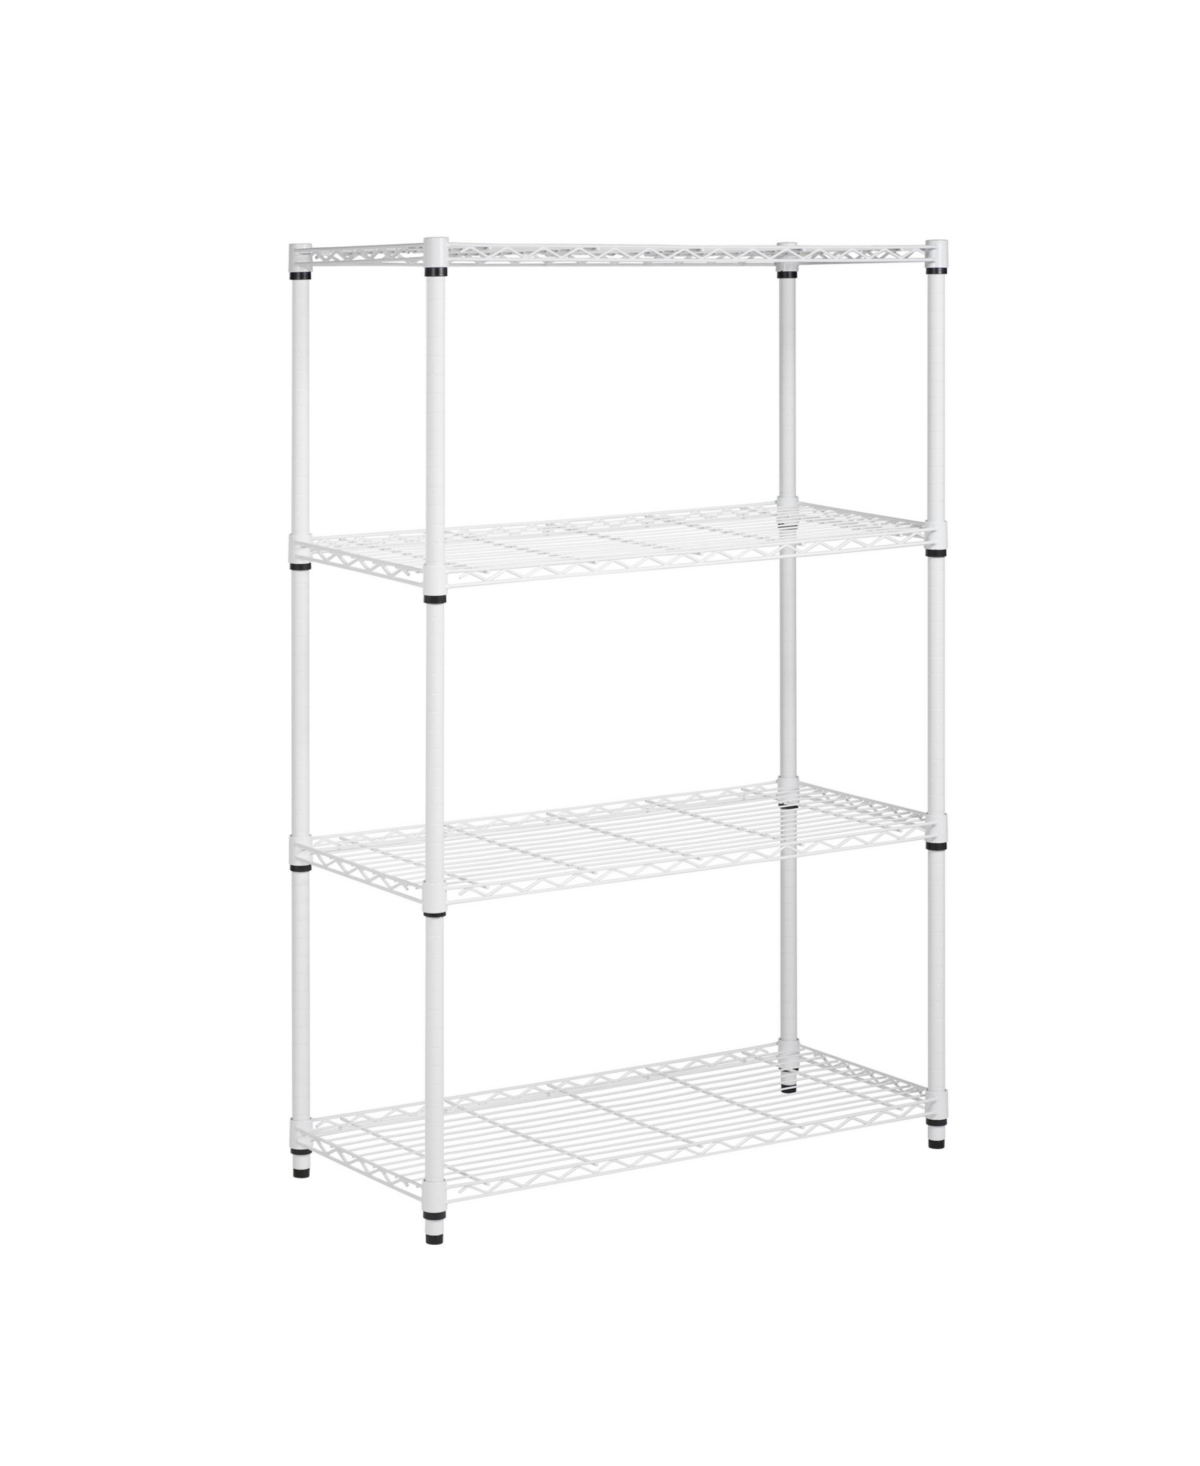 Honey Can Do Heavy Duty 4 Tier Adjustable Shelving Unit In White